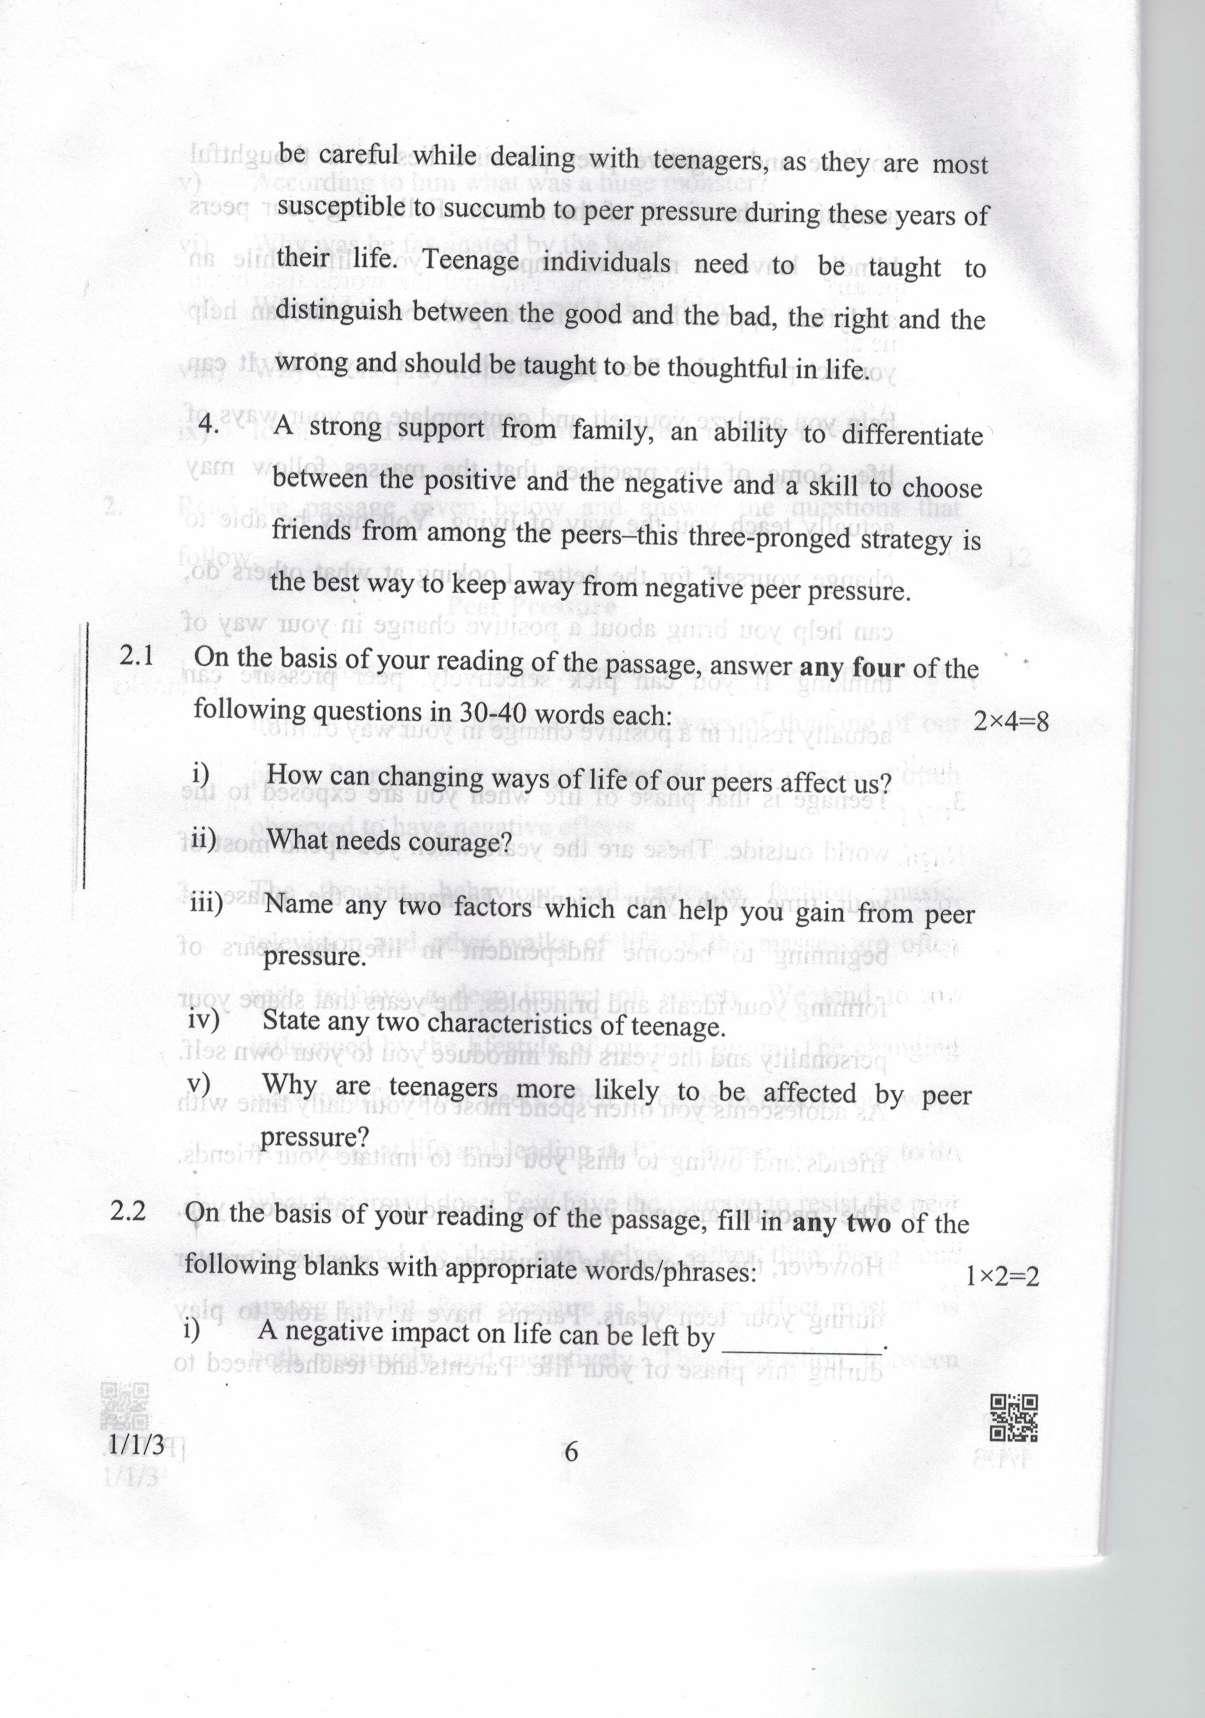 CBSE Class 10 1-1-3 Eng. Comm. 2019 Question Paper - Page 6